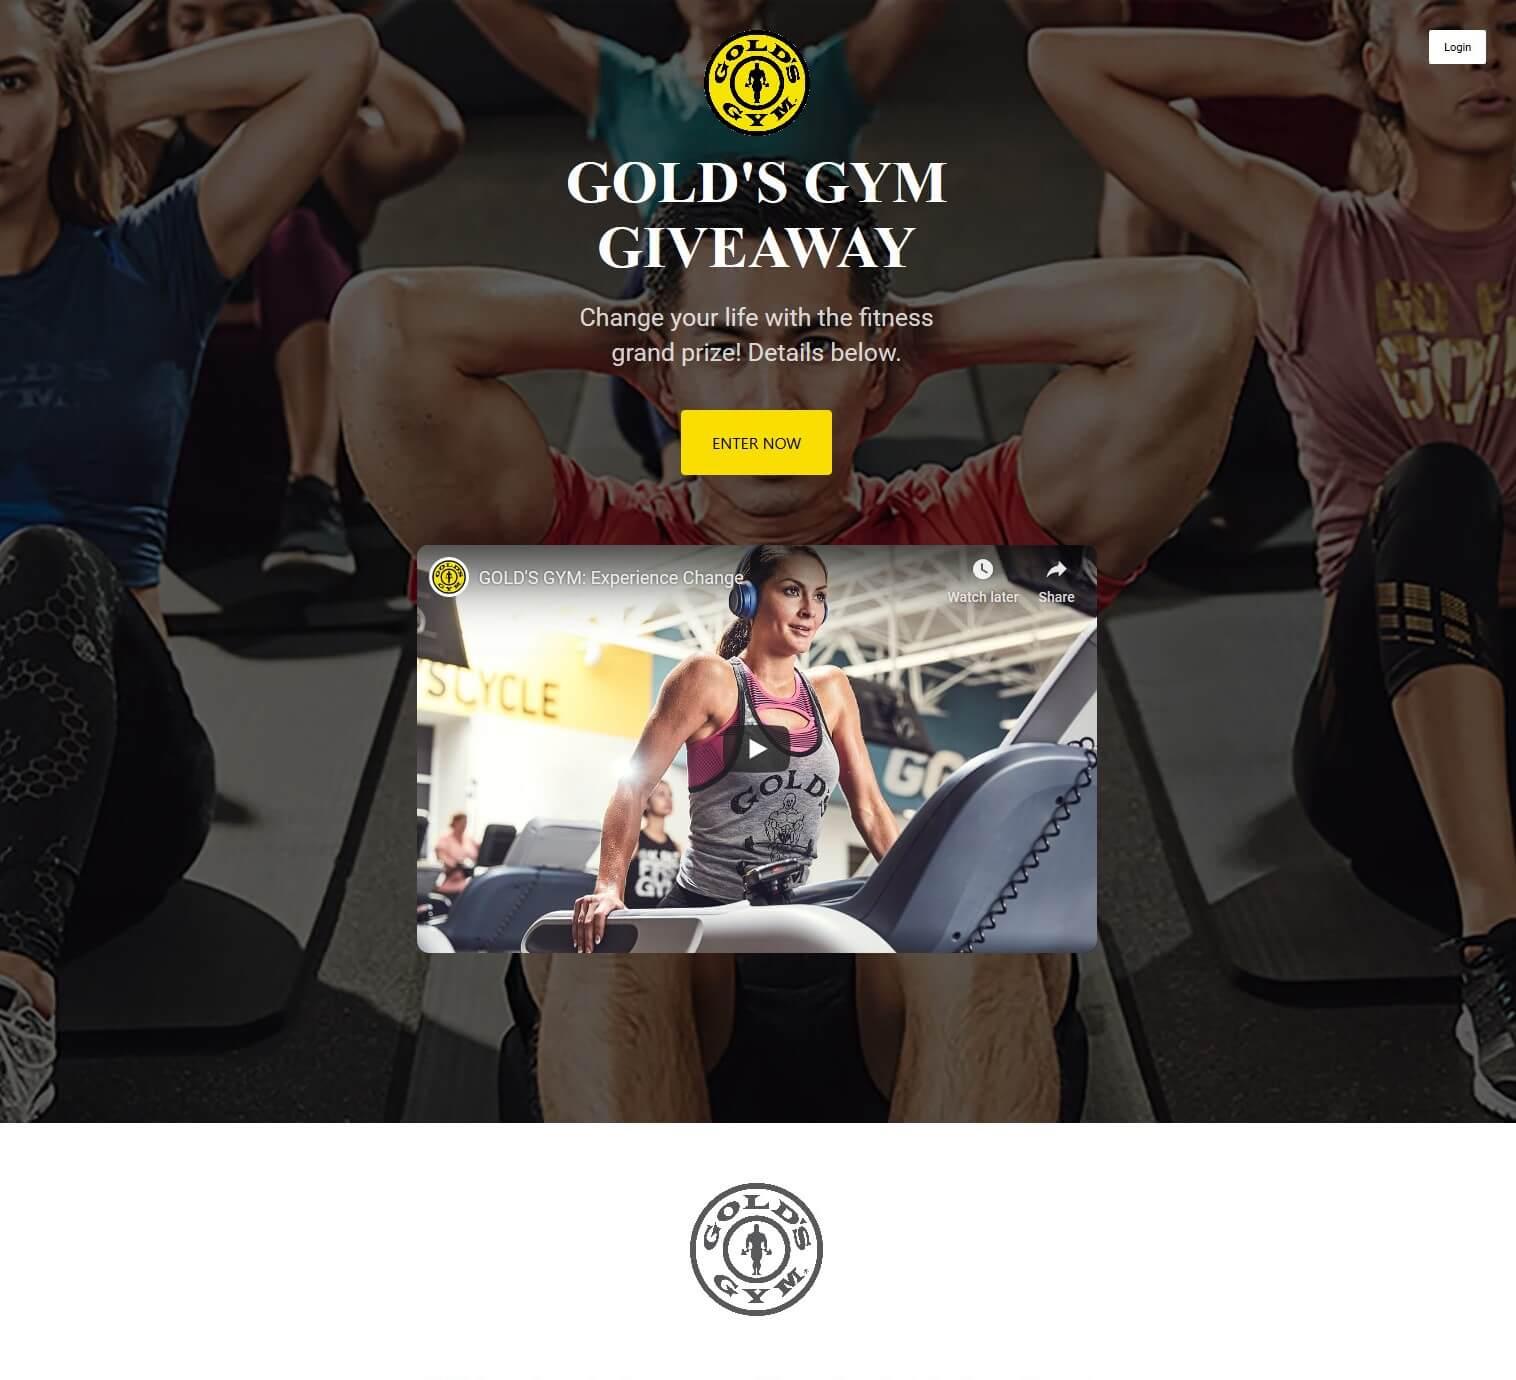 Gold's Gym Giveaway Competition